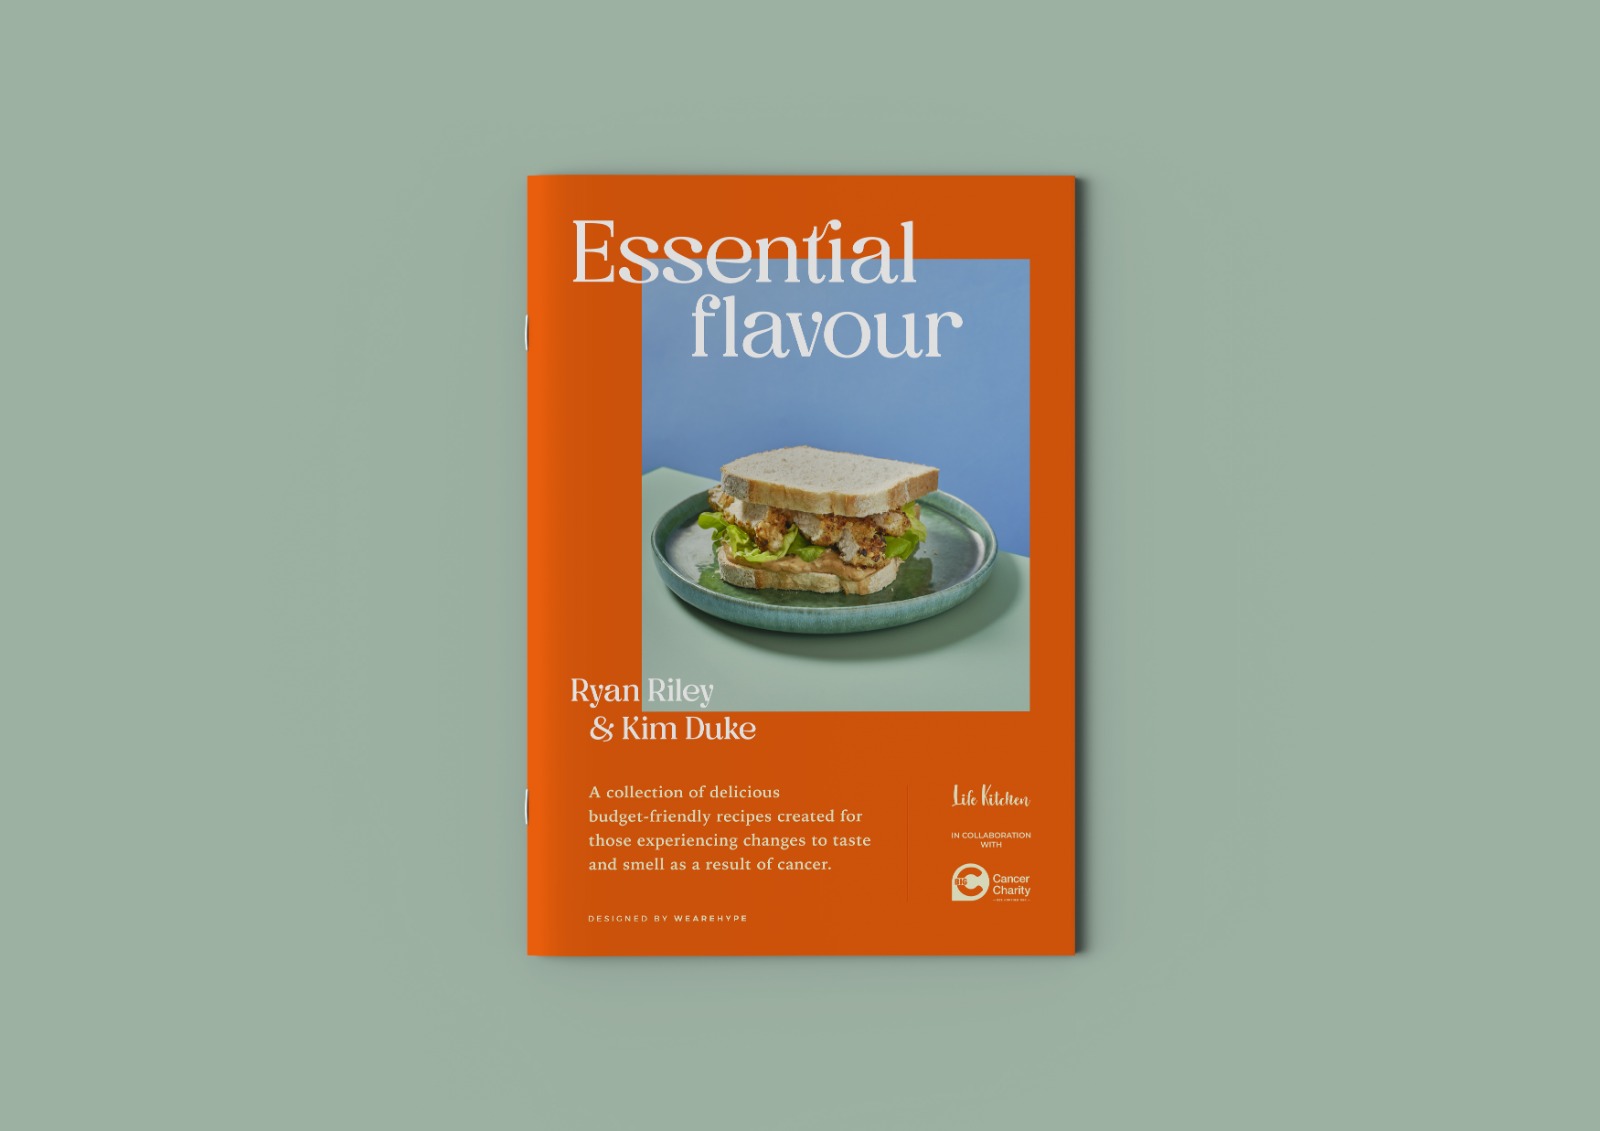 Bring Flavour Alive, Hints & Tips